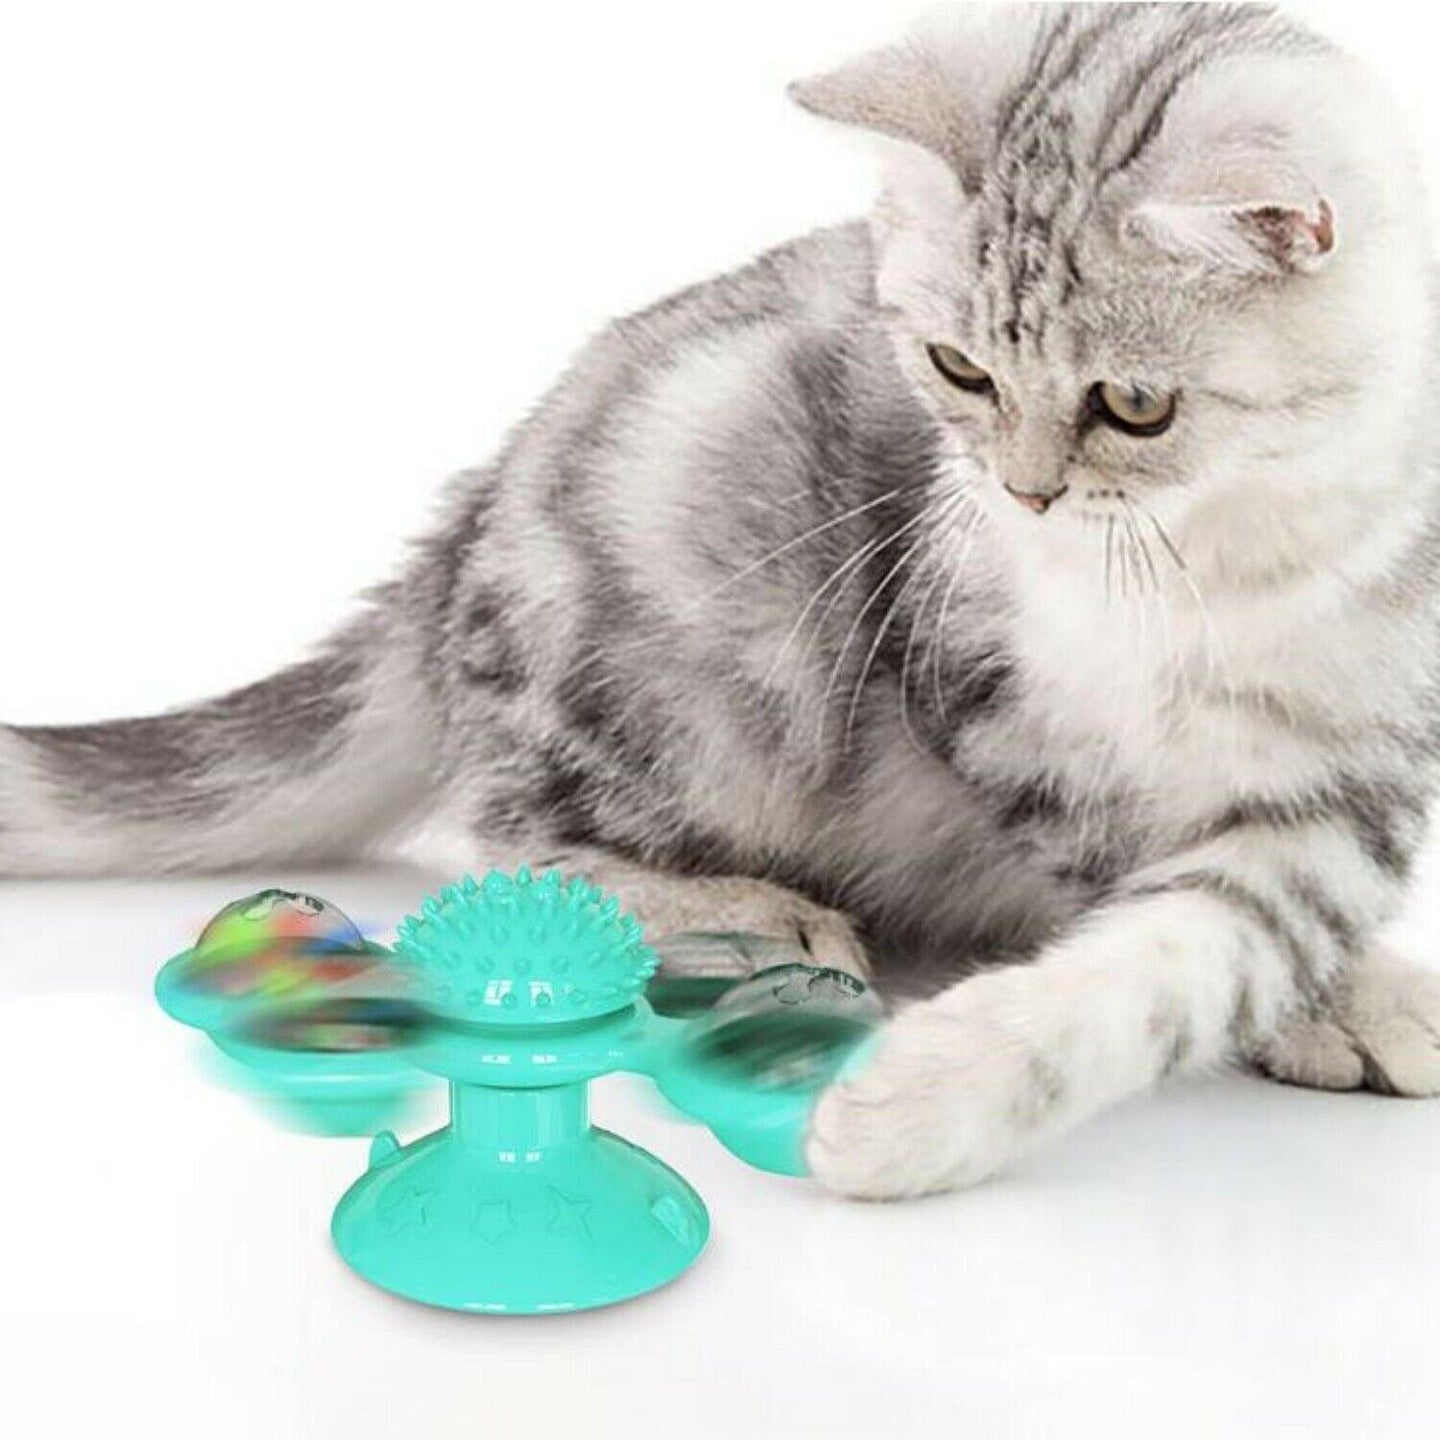 New Windmill Cat Toys Fidget Spinner for Kitten with LED and Catnip Ball - Curtis & Ivory